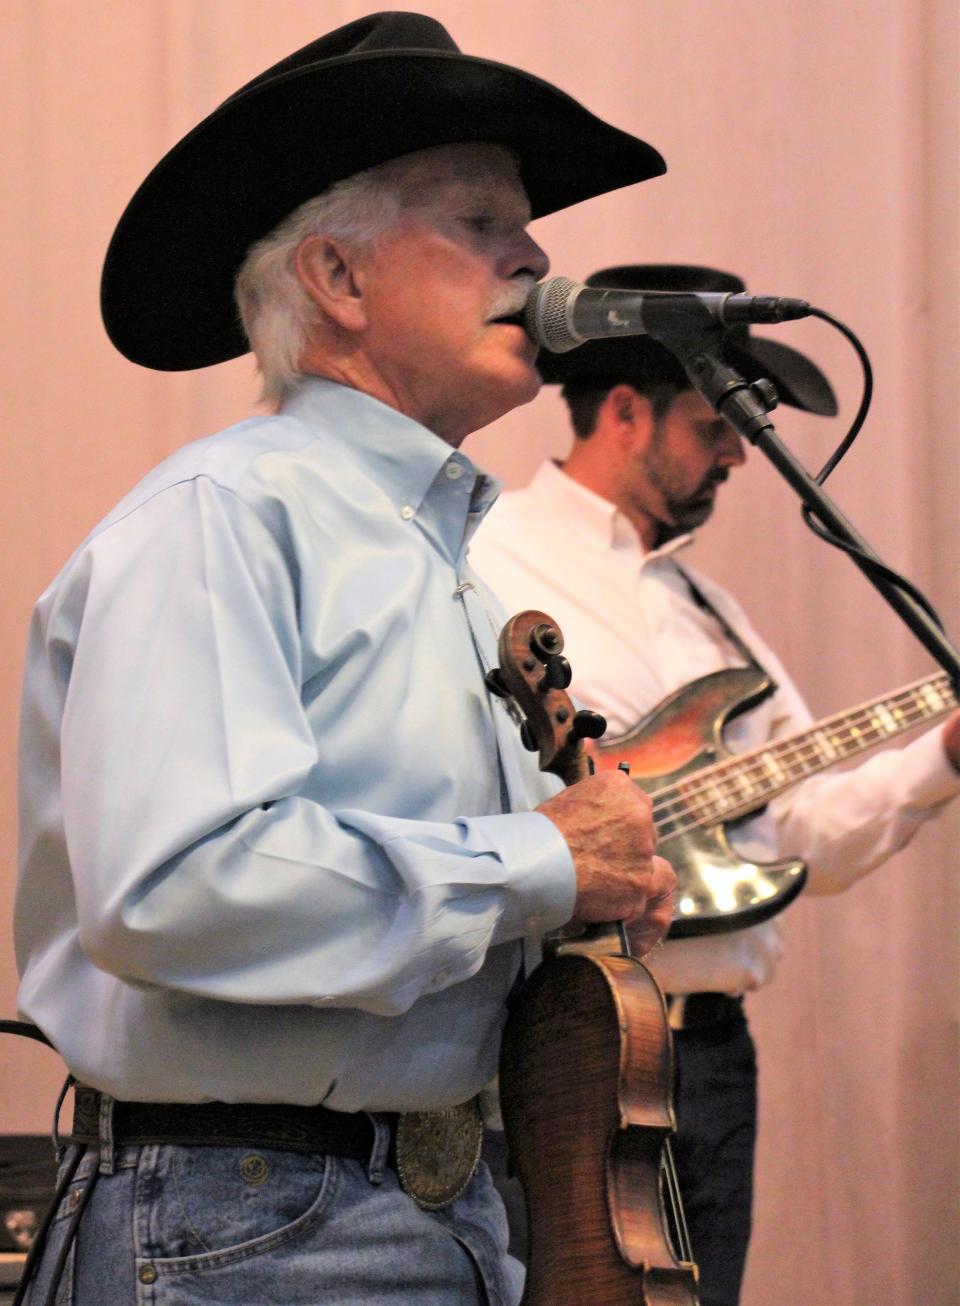 Jody Nix sings, then fiddles during his show last weekend at the Abilene Woman's Club for a Texas-flavored weekend to celebrate Texas Independence Day two days earlier.